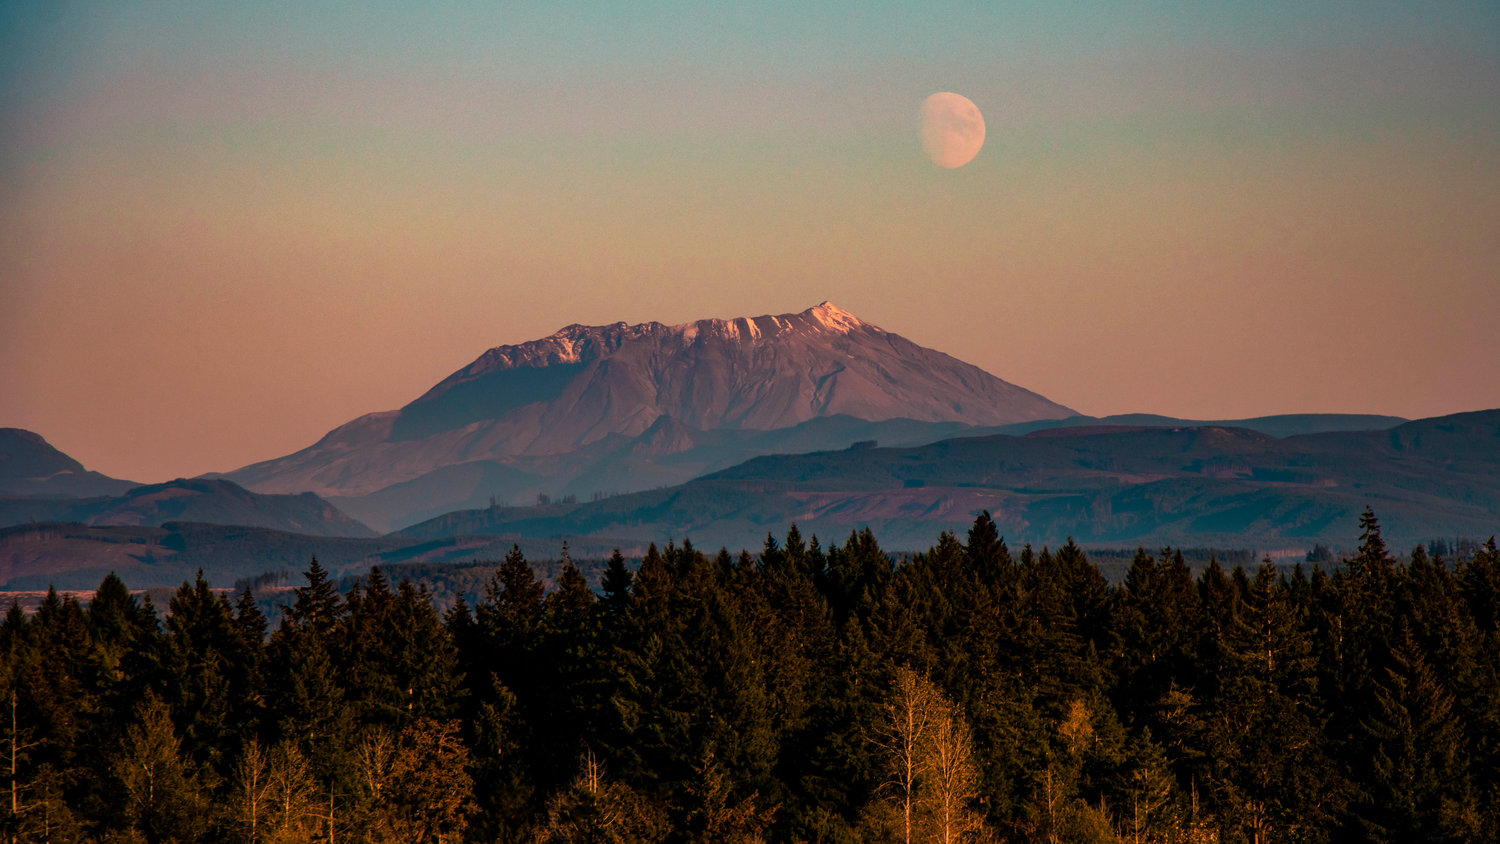 The moon rises above Mount St. Helens at sunset.